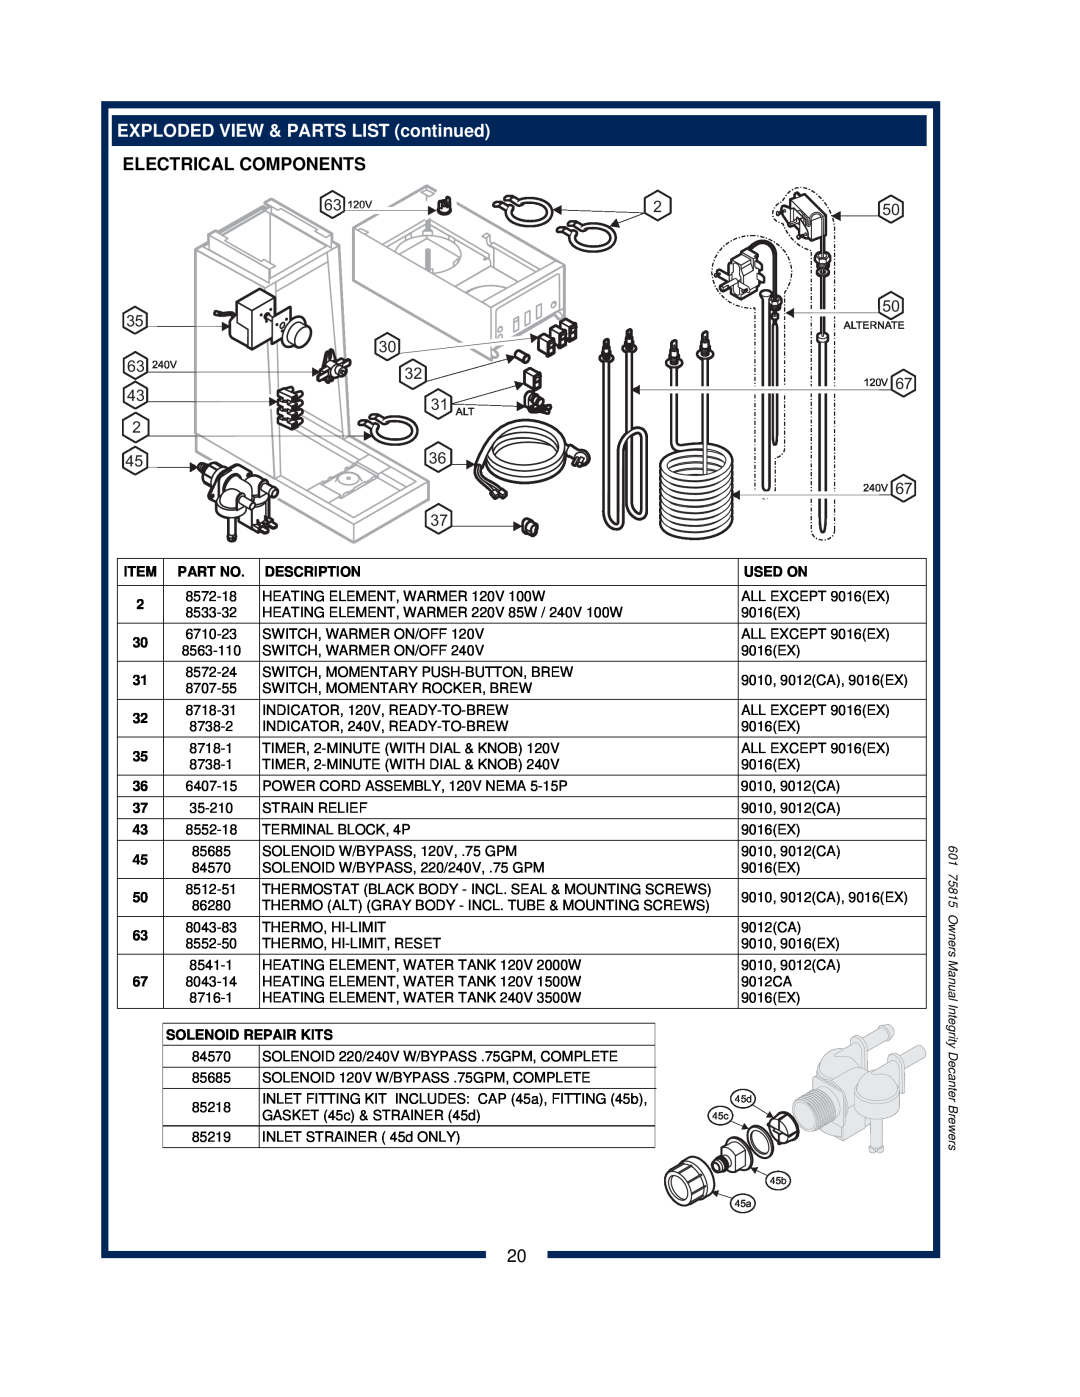 Bloomfield 9016, 9010, 9012 owner manual EXPLODED VIEW & PARTS LIST continued, Electrical Components, 31 ALT 